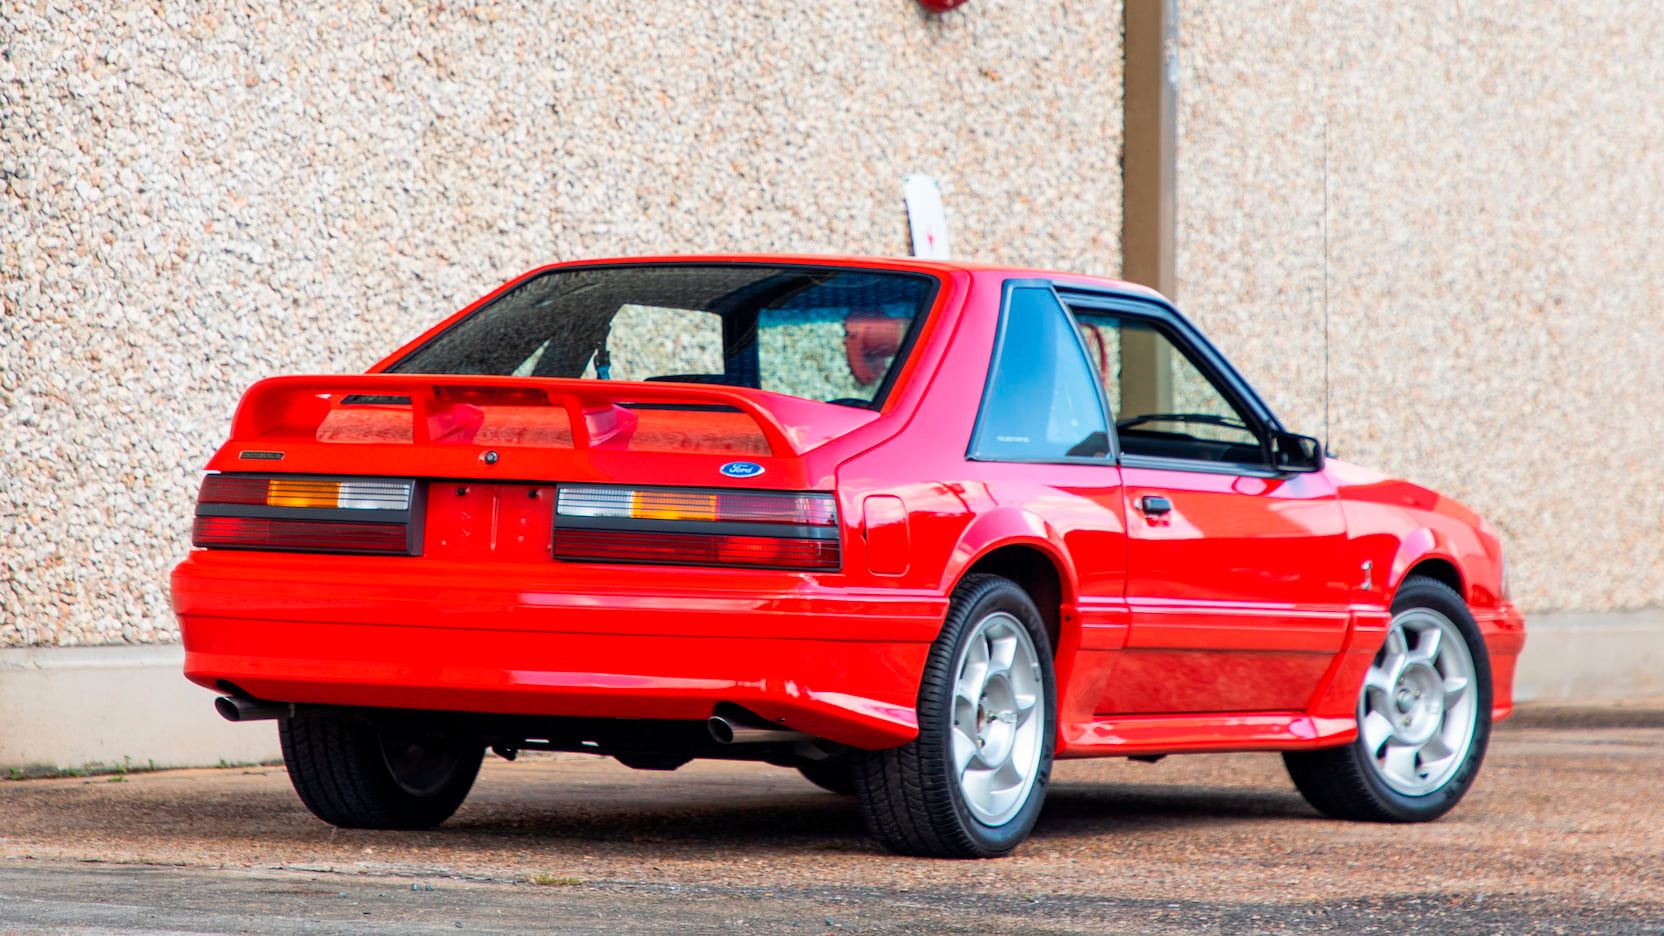 A parked red 1993 Ford SVT Cobra Mustang